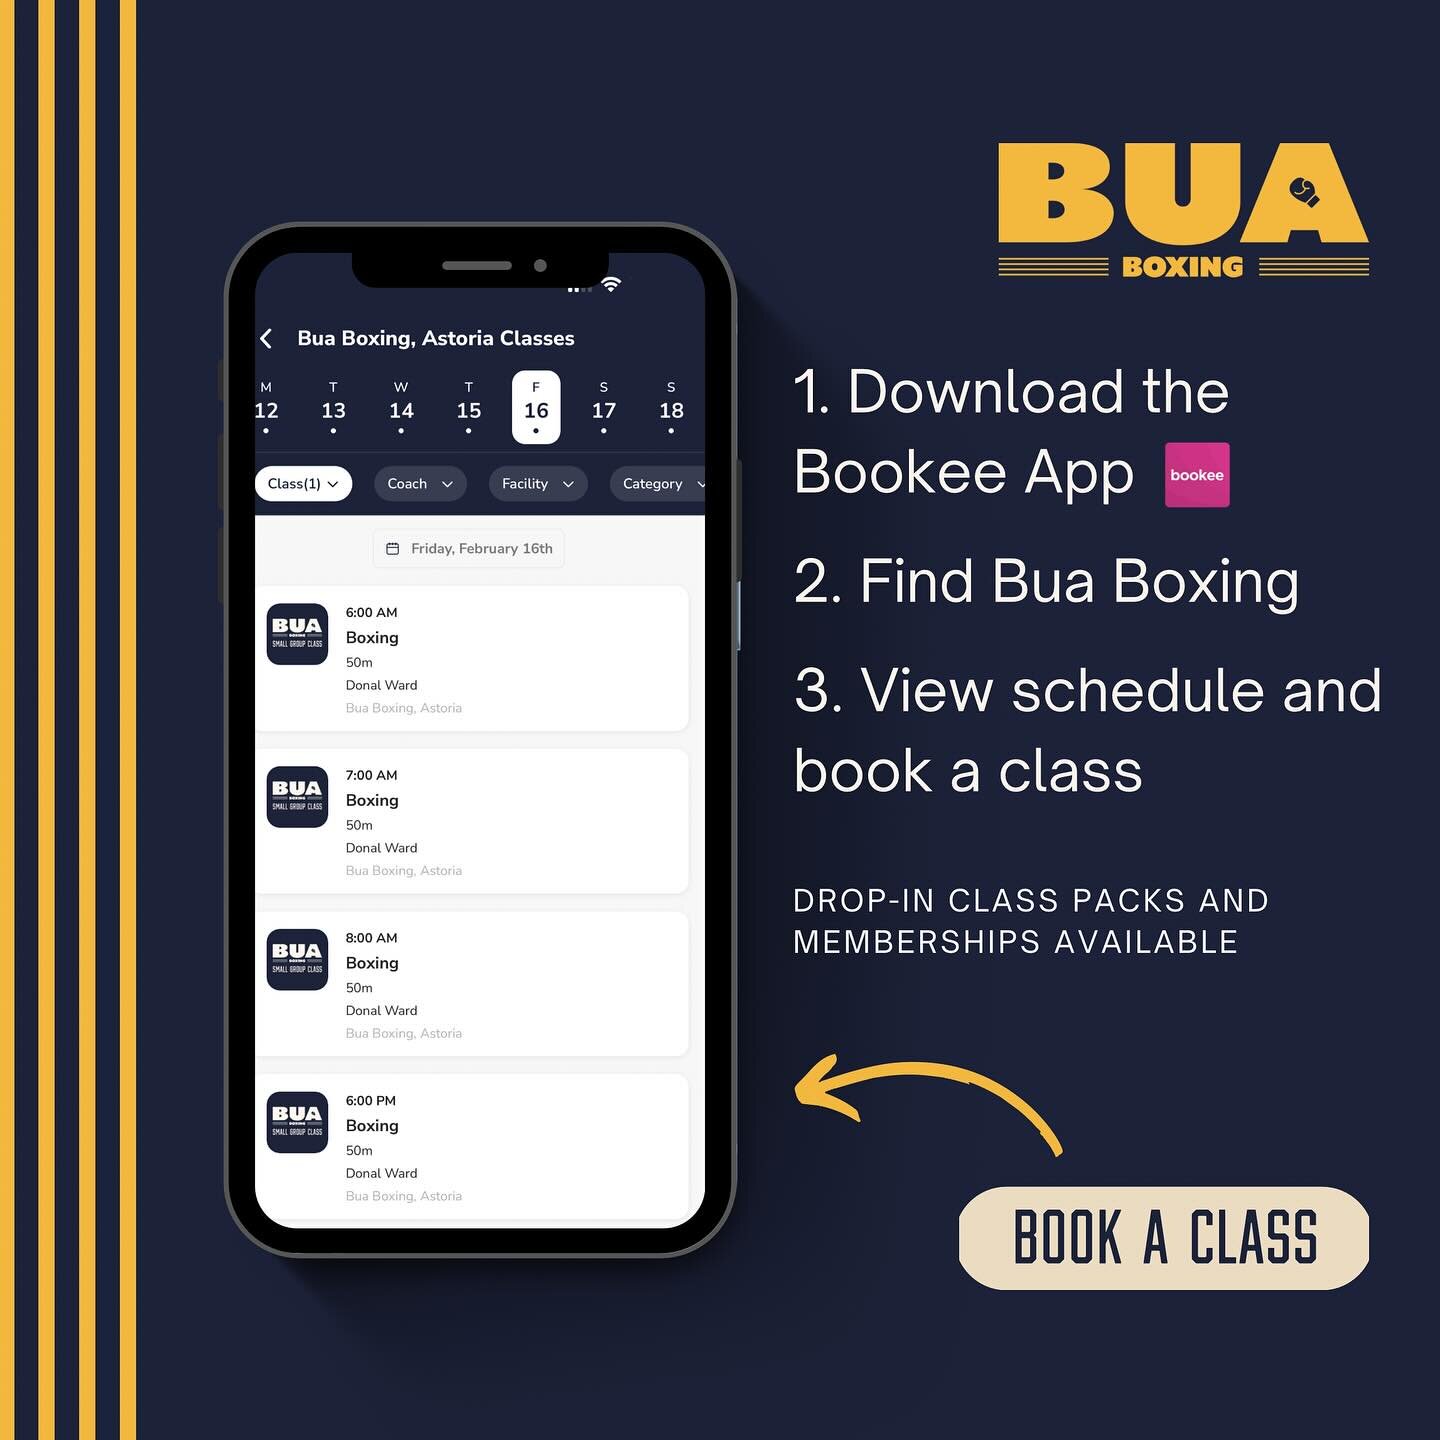 Did you know? You can view the @buaboxing class schedule, personal training availability, and book - all through the @bookeeapp in just a few clicks!📲🥊

________________________
#astoria #boxing #workout #fitness #fit #boxfit #app